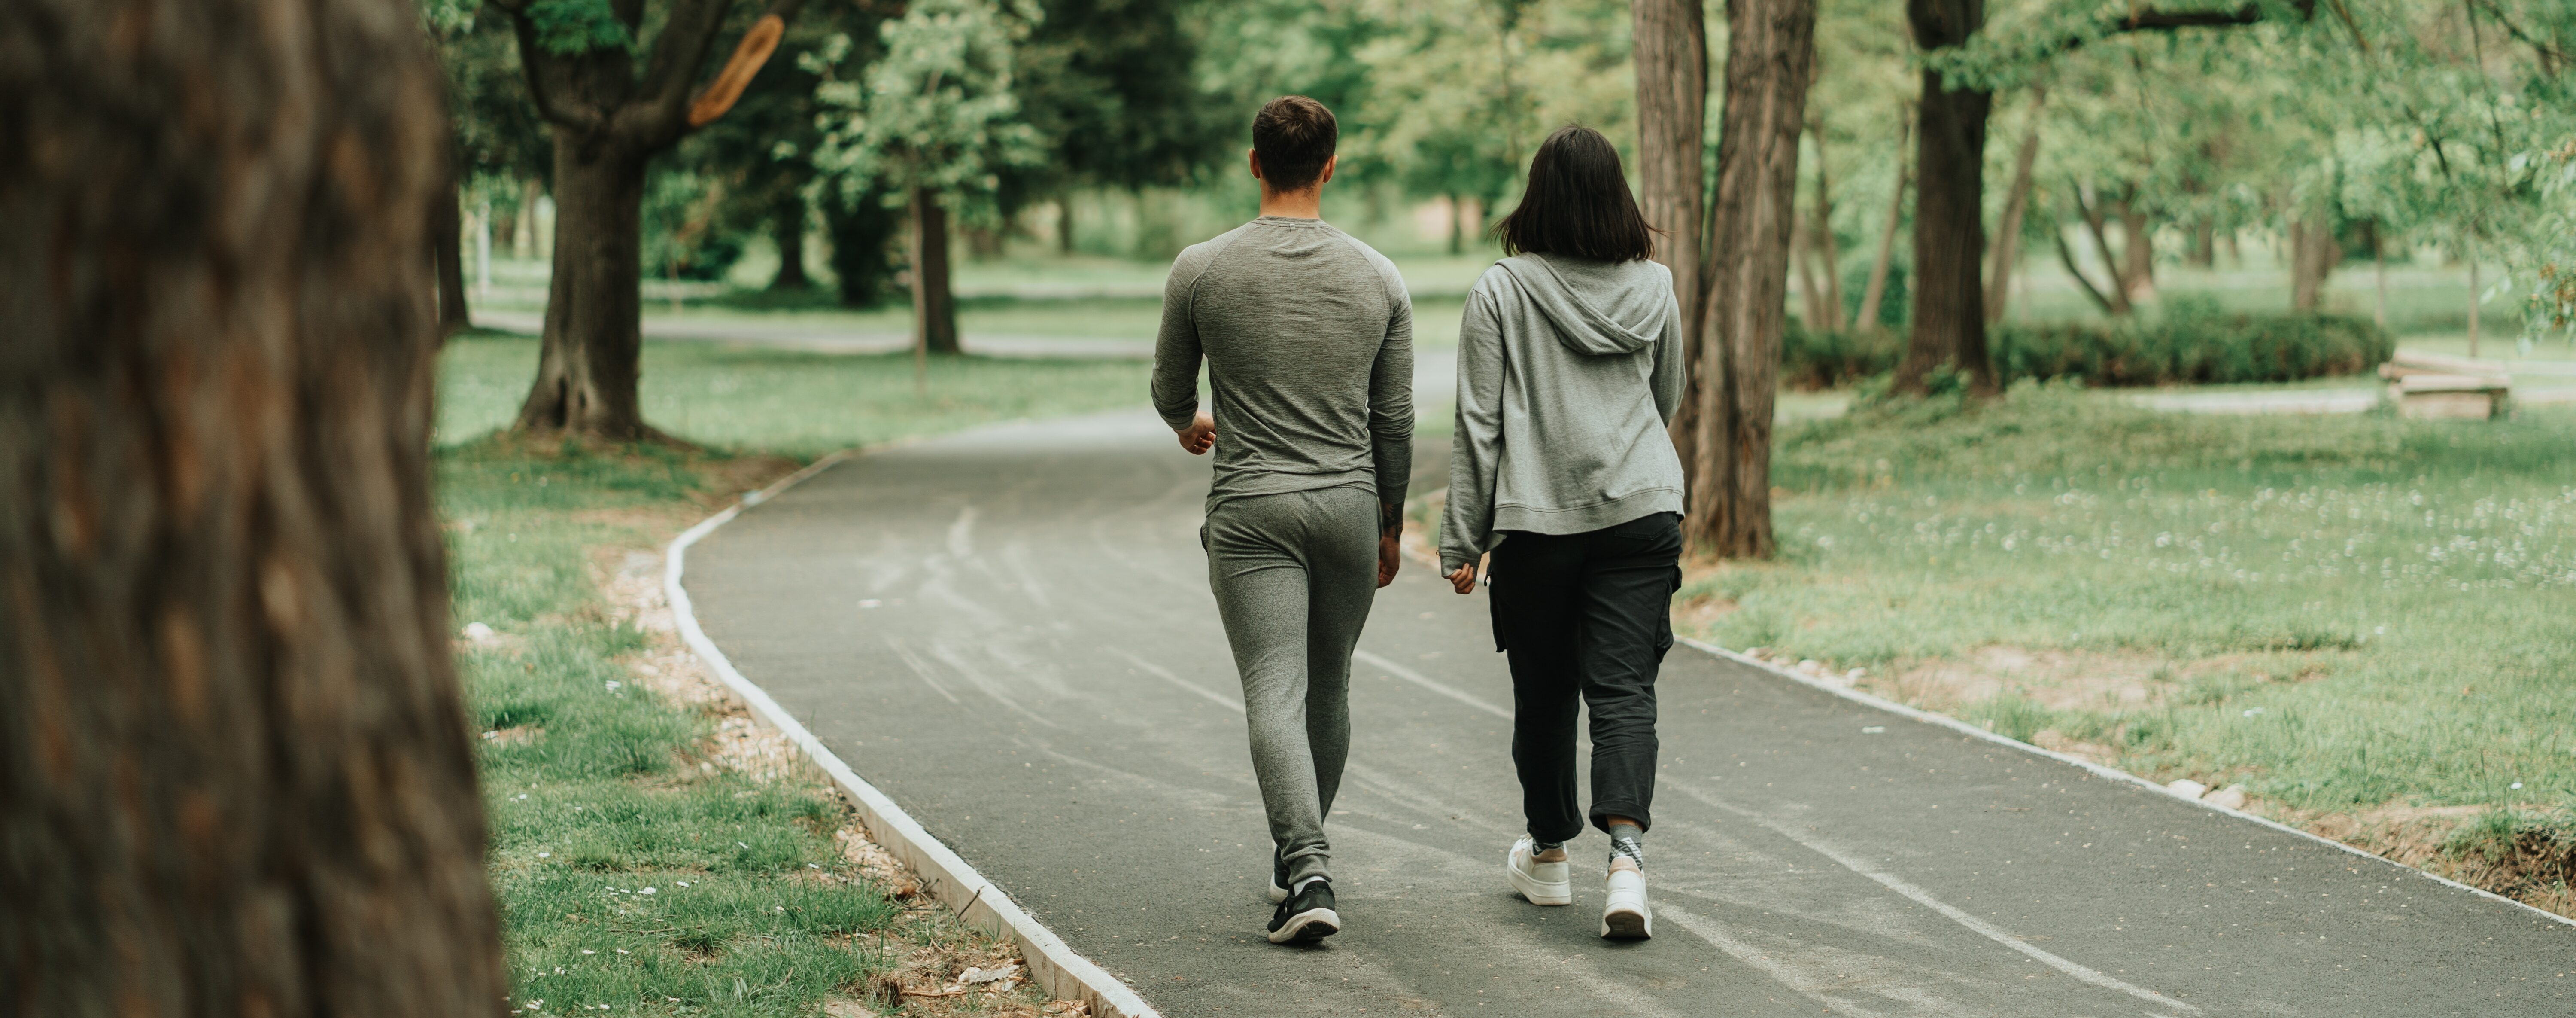 Two people do walk training on a park path, surrounded by greenery.